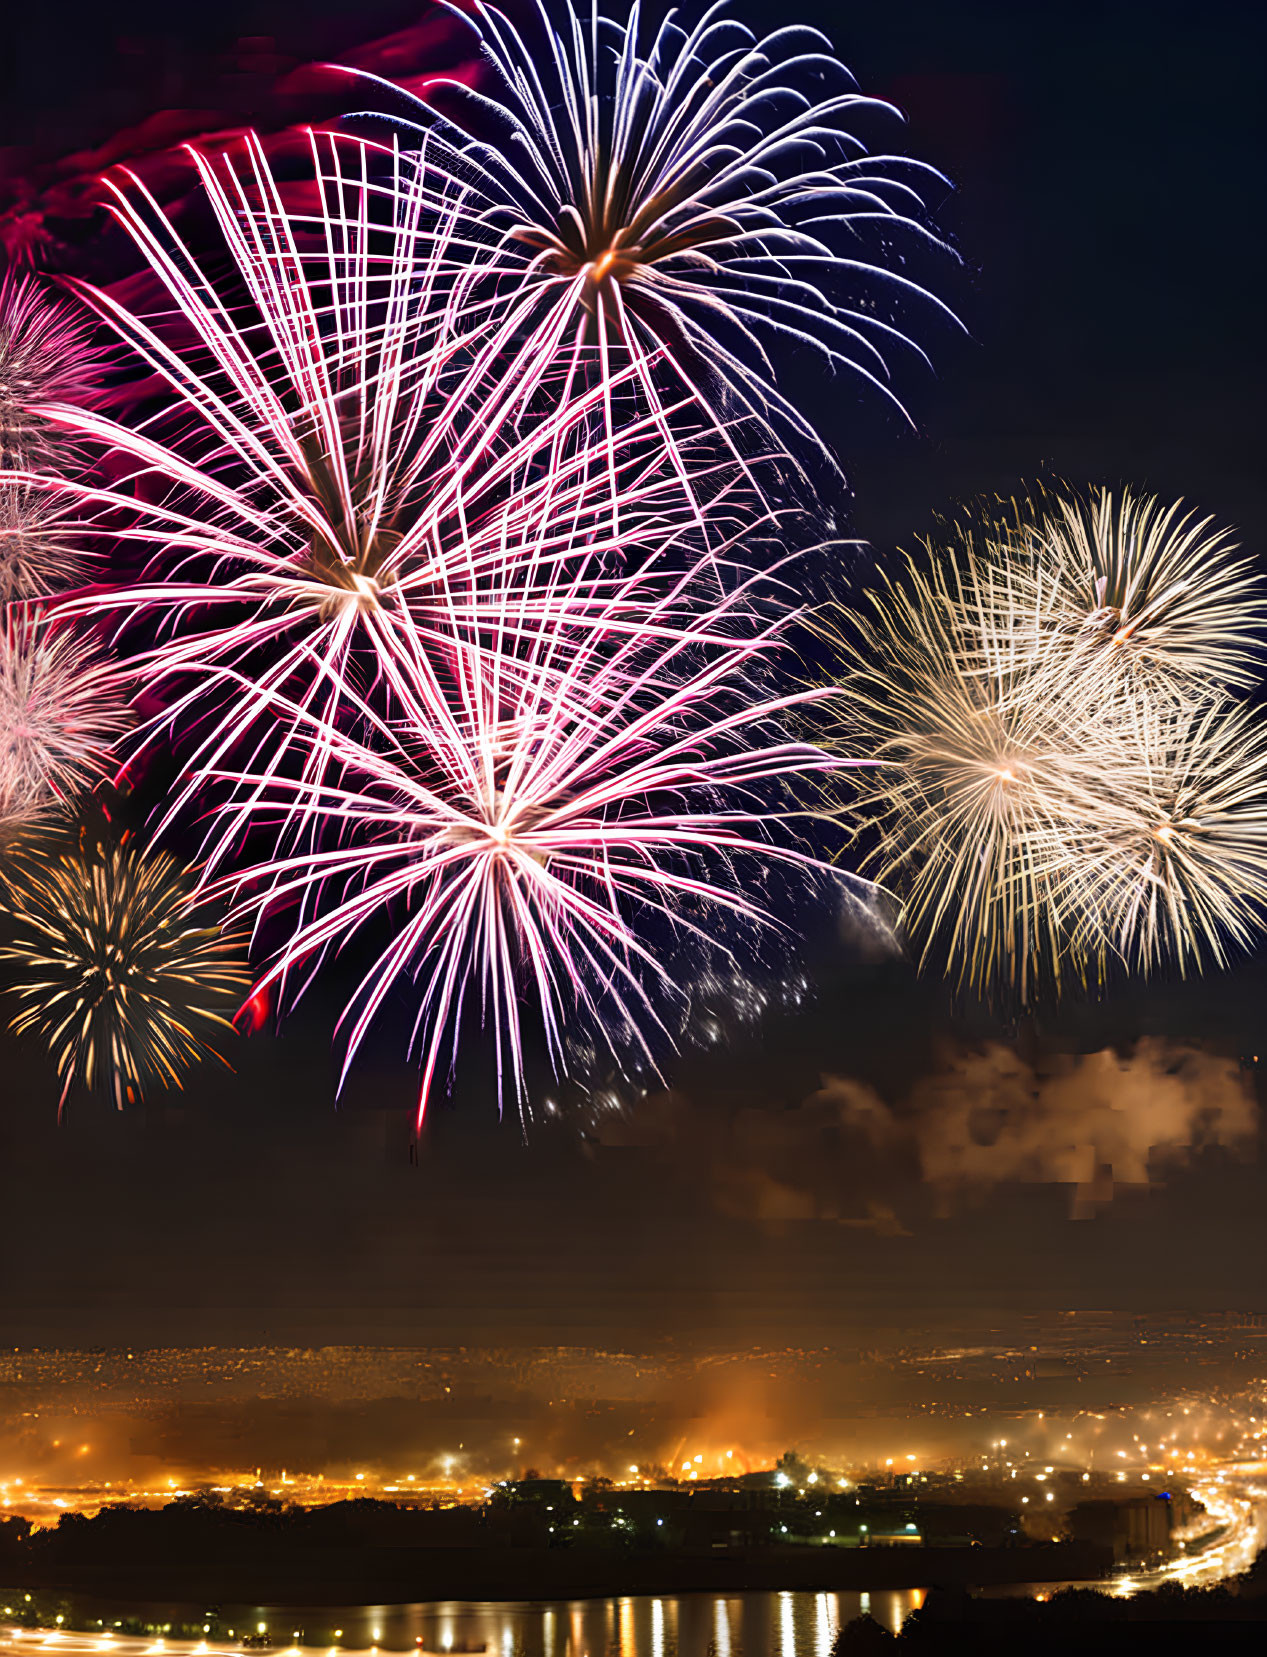 Colorful fireworks light up city night sky in purple, blue, and gold burst.